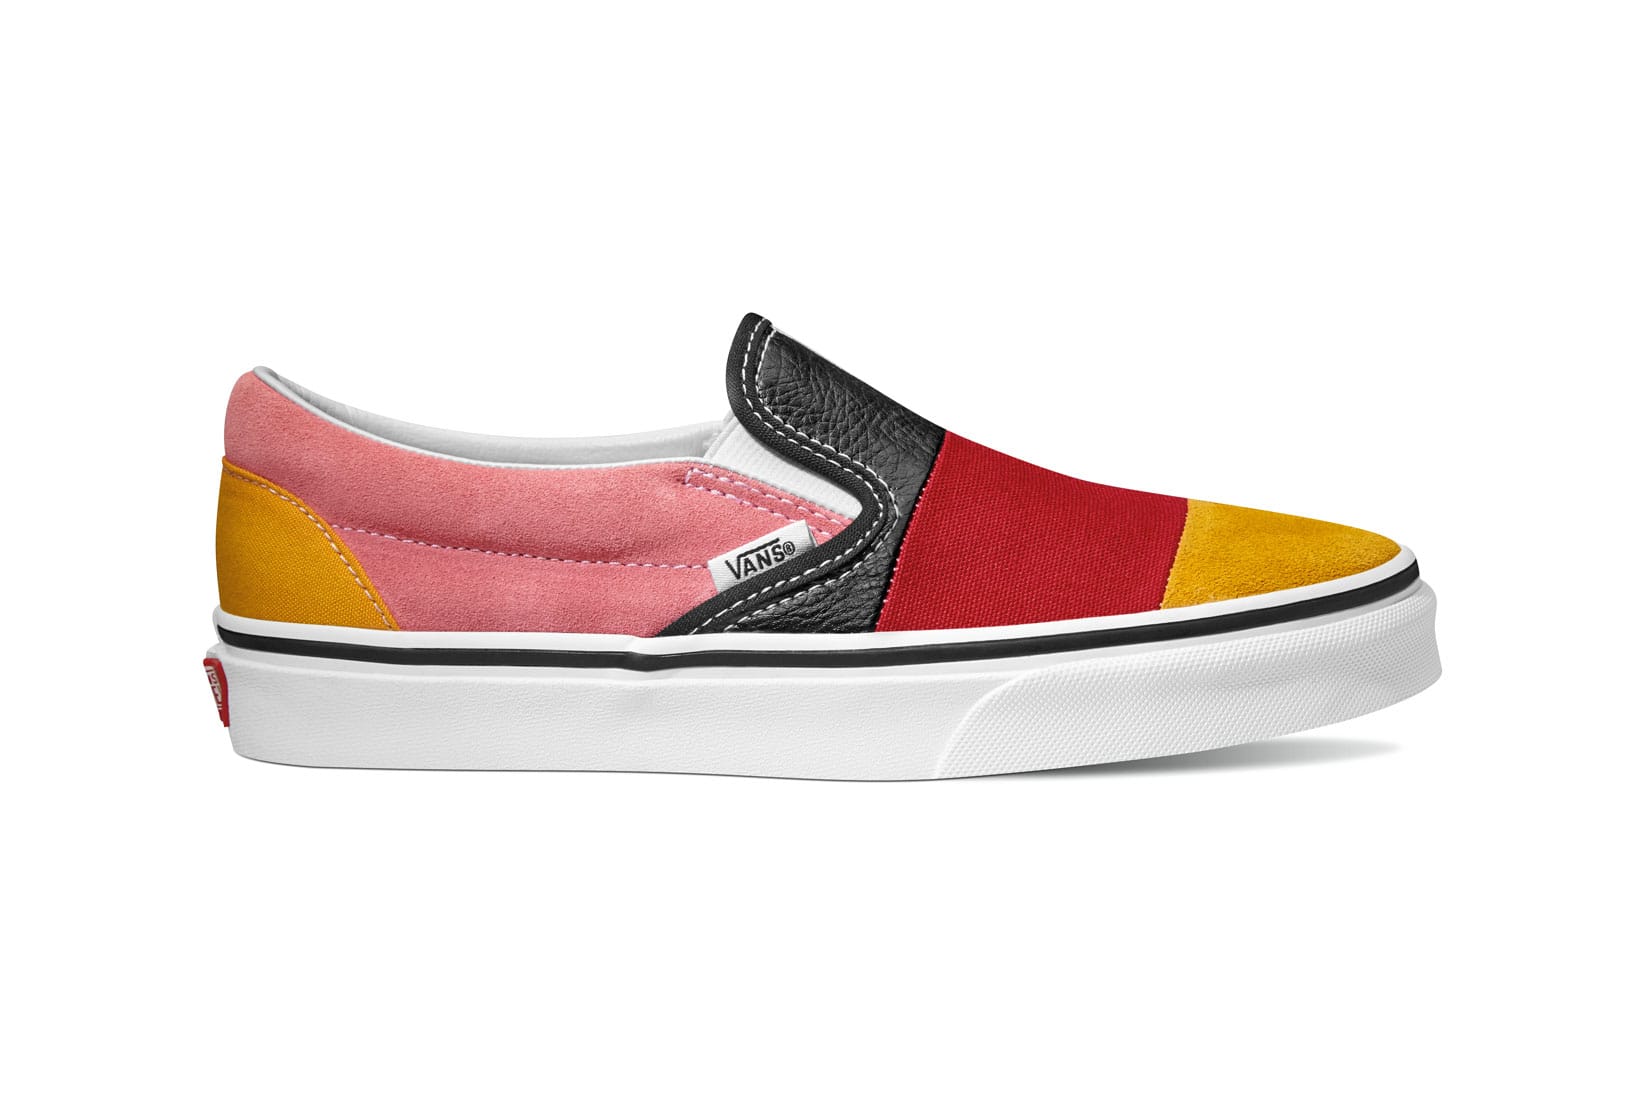 vans era patchwork,Save up to 19%,www.ilcascinone.com